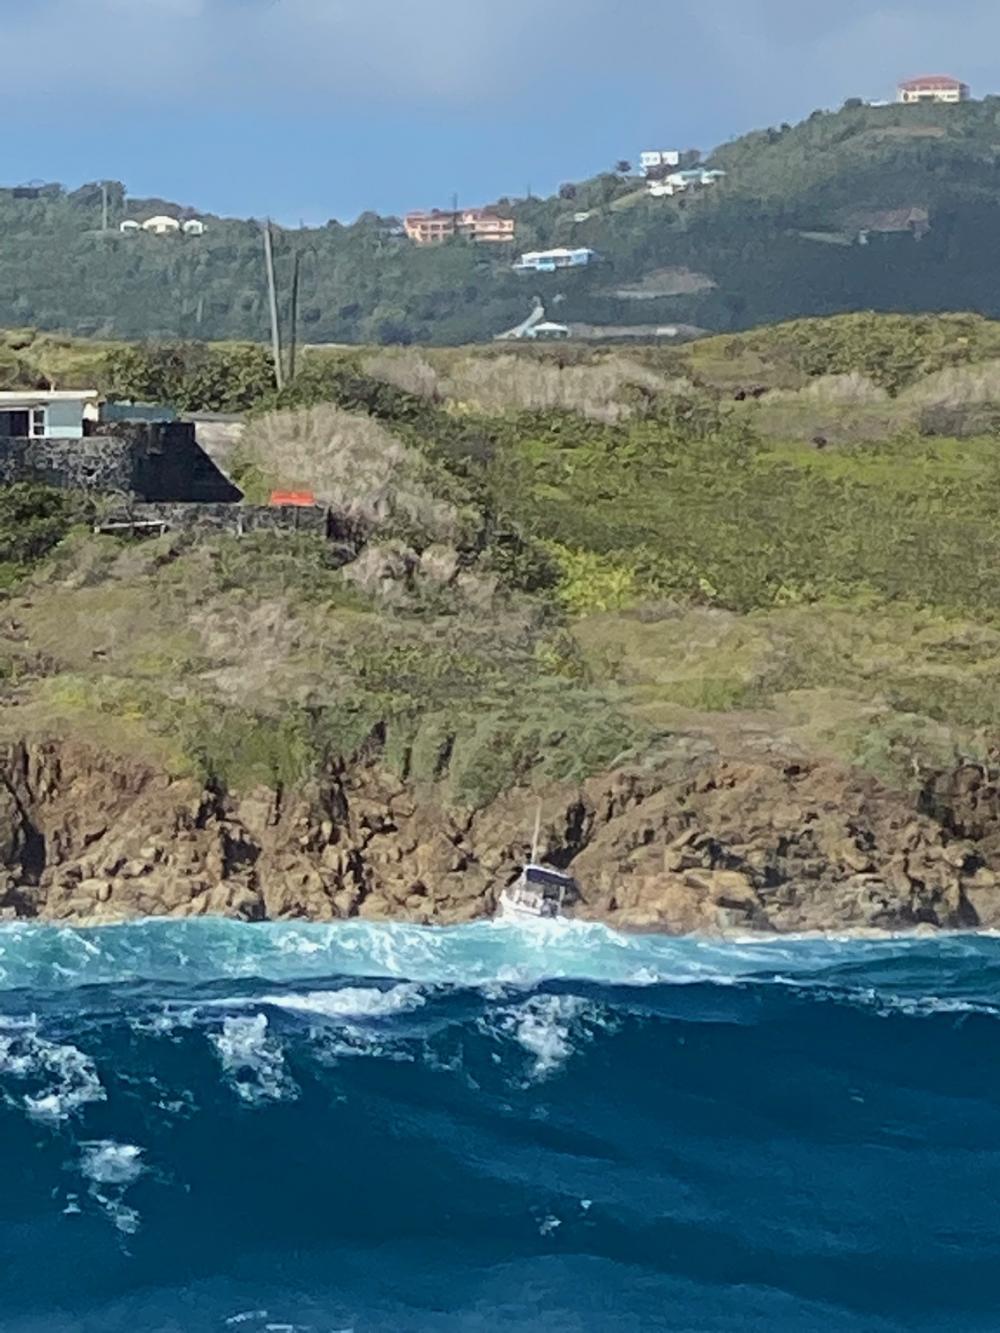 The pleasure craft Katana washed ashore on the rocks the morning of March 7, 2022, near Judith’s Fancy in St. Croix, U.S. Virgin Islands, after a Coast Guard boat crew rescued four men and five women from the vessel the evening of March 6, 2022, when the vessel reportedly ran out of fuel and started drifting towards the rocks. (U.S. Coast Guard photo)